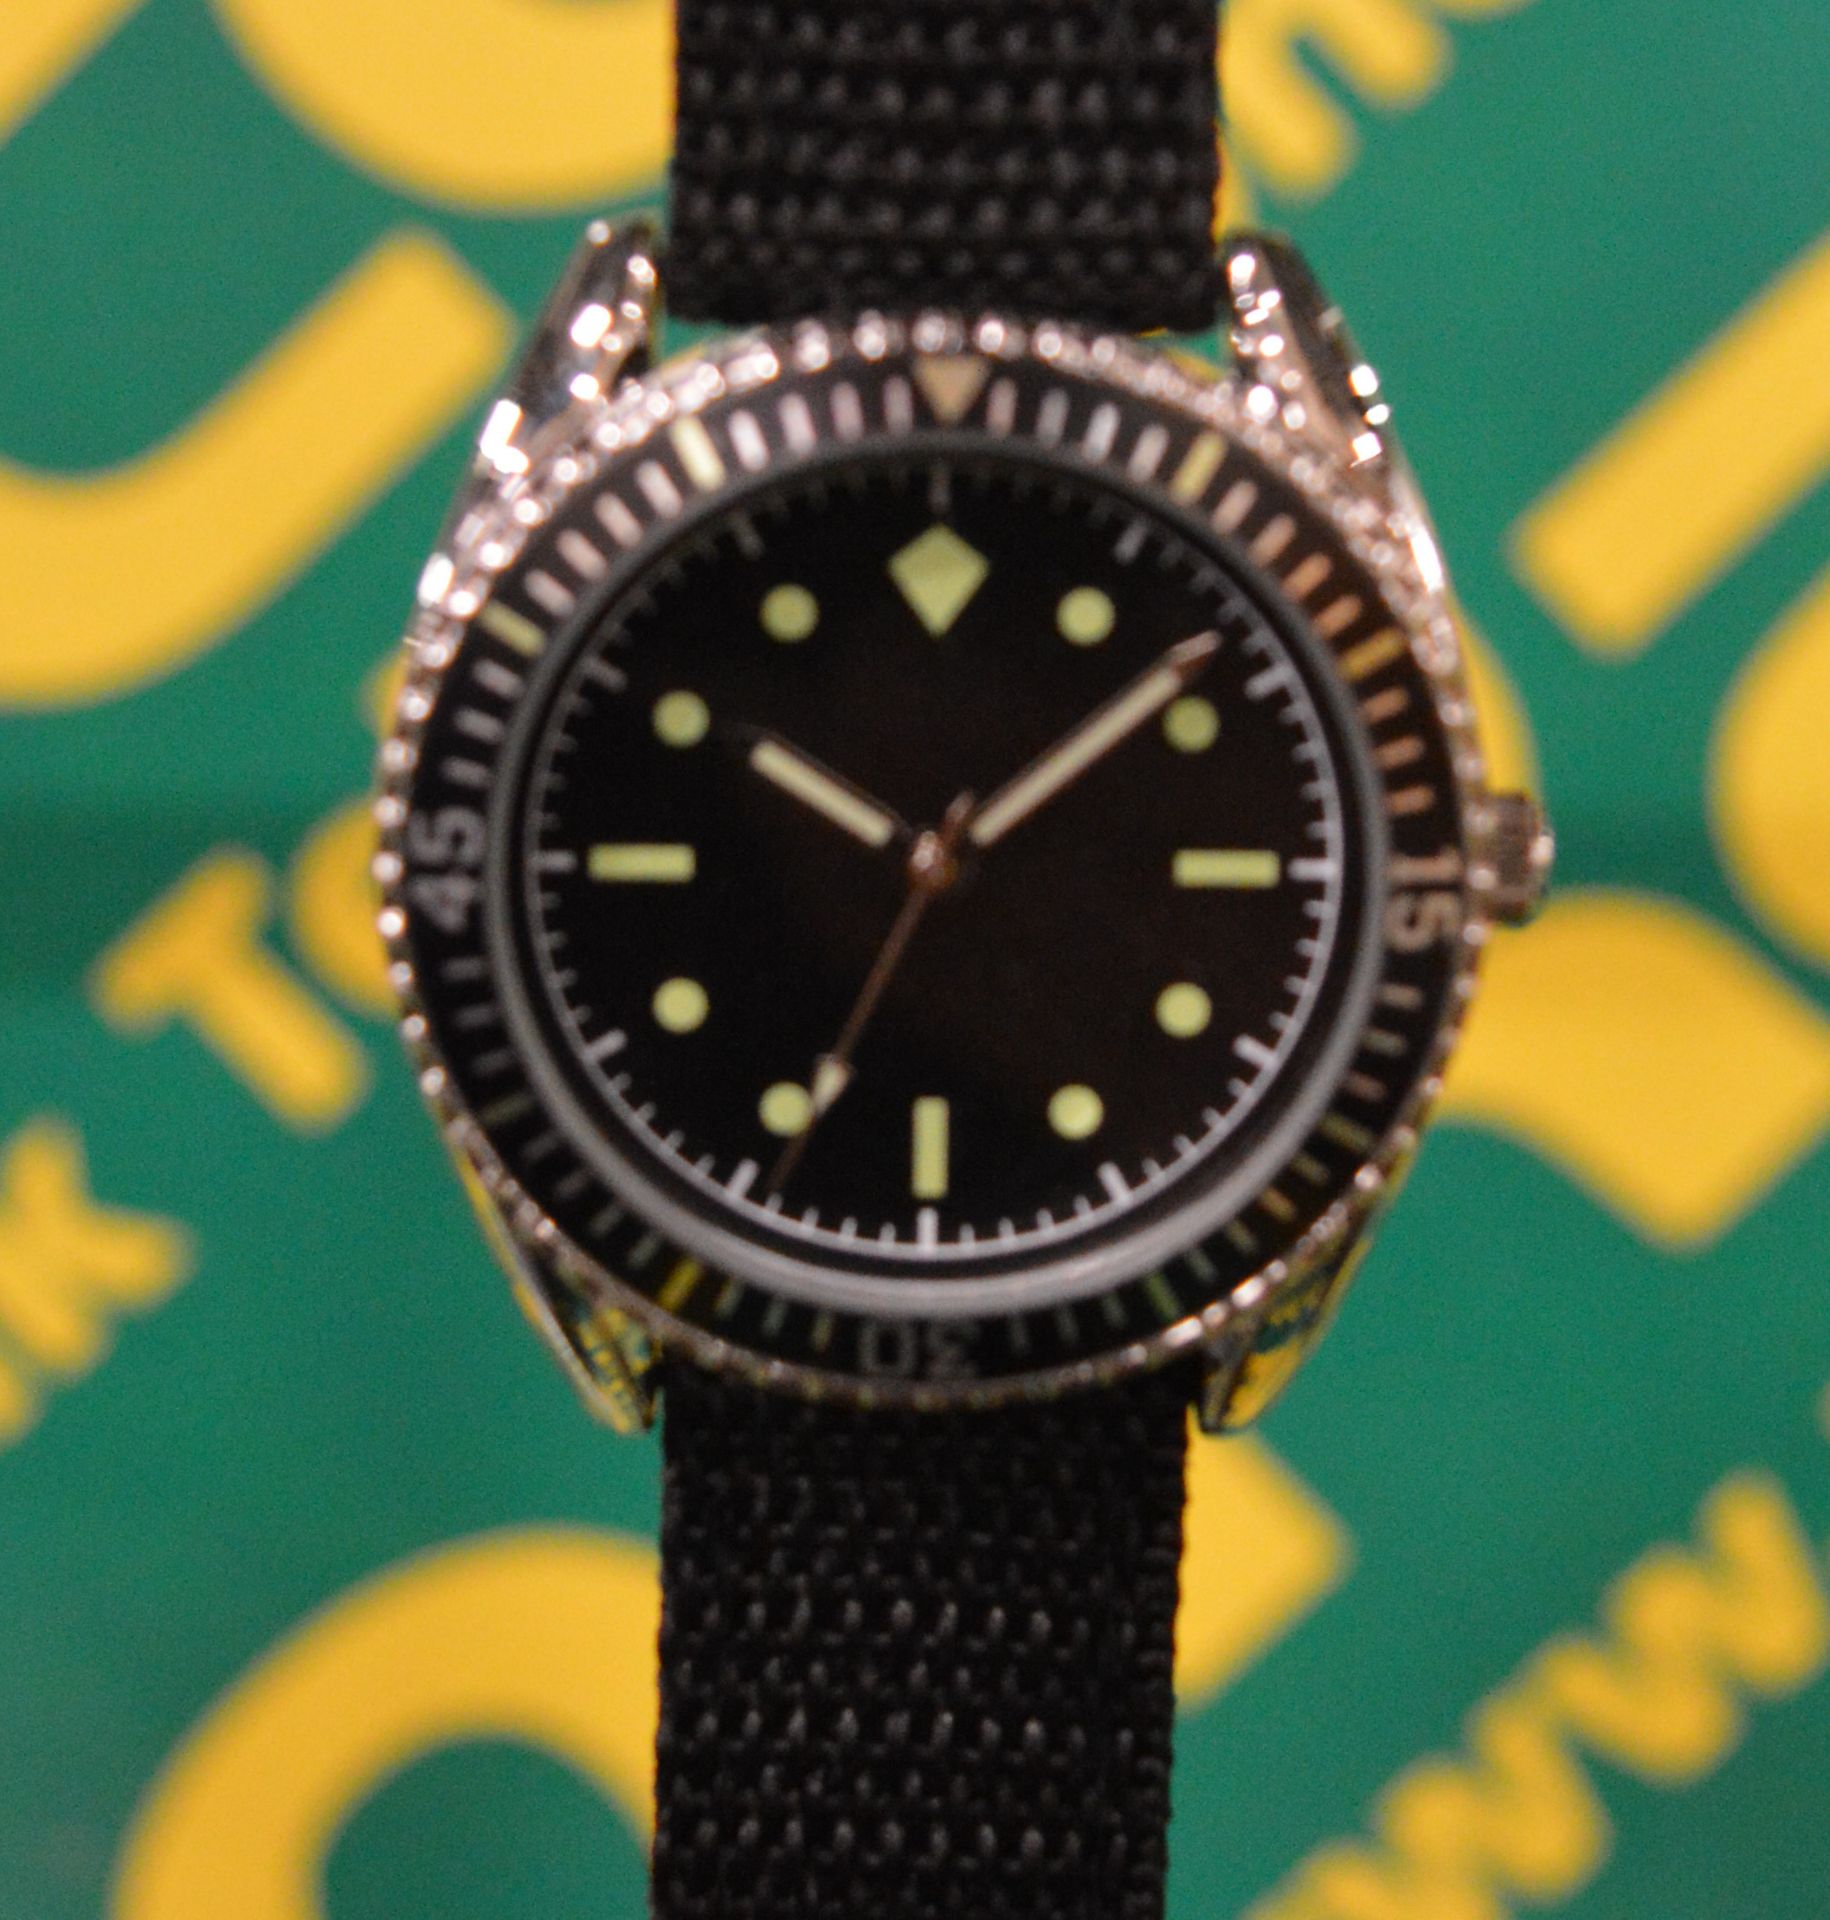 Reproduction Wristwatch - German Naval Commando. - Image 2 of 2